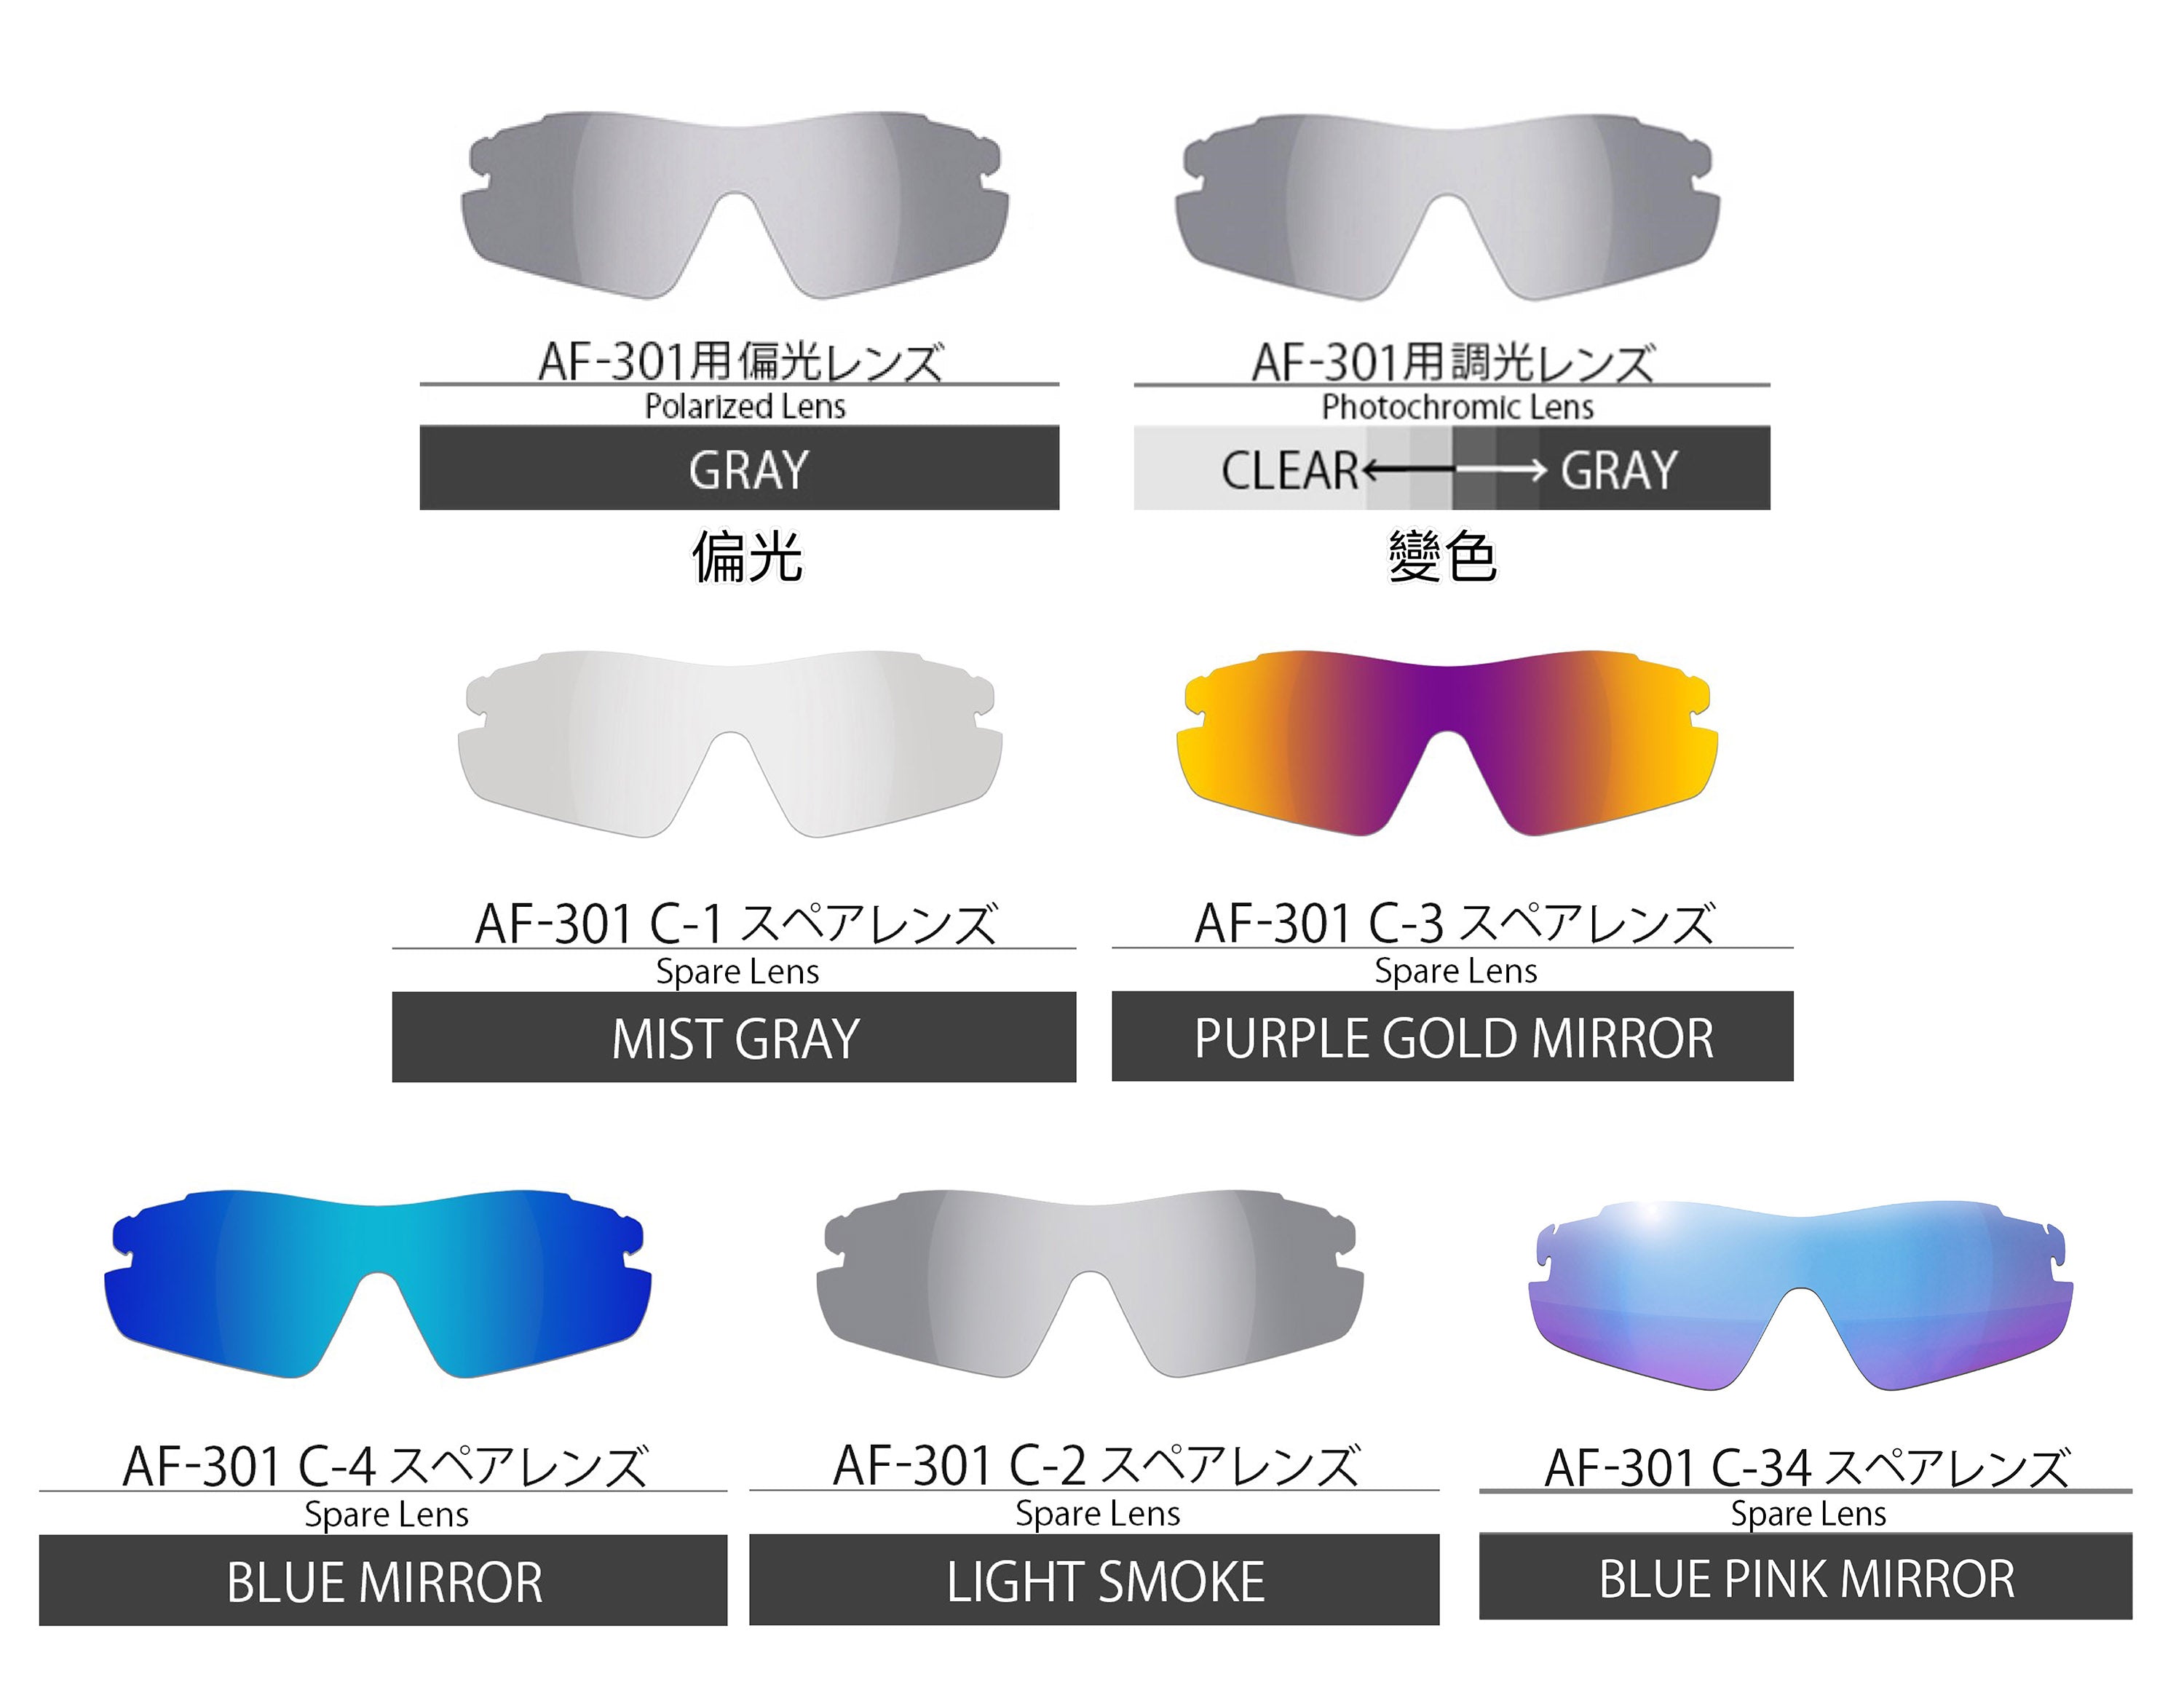 AirFly - AF301 C2 (Light Smoke Lens)【Pre-order Now】